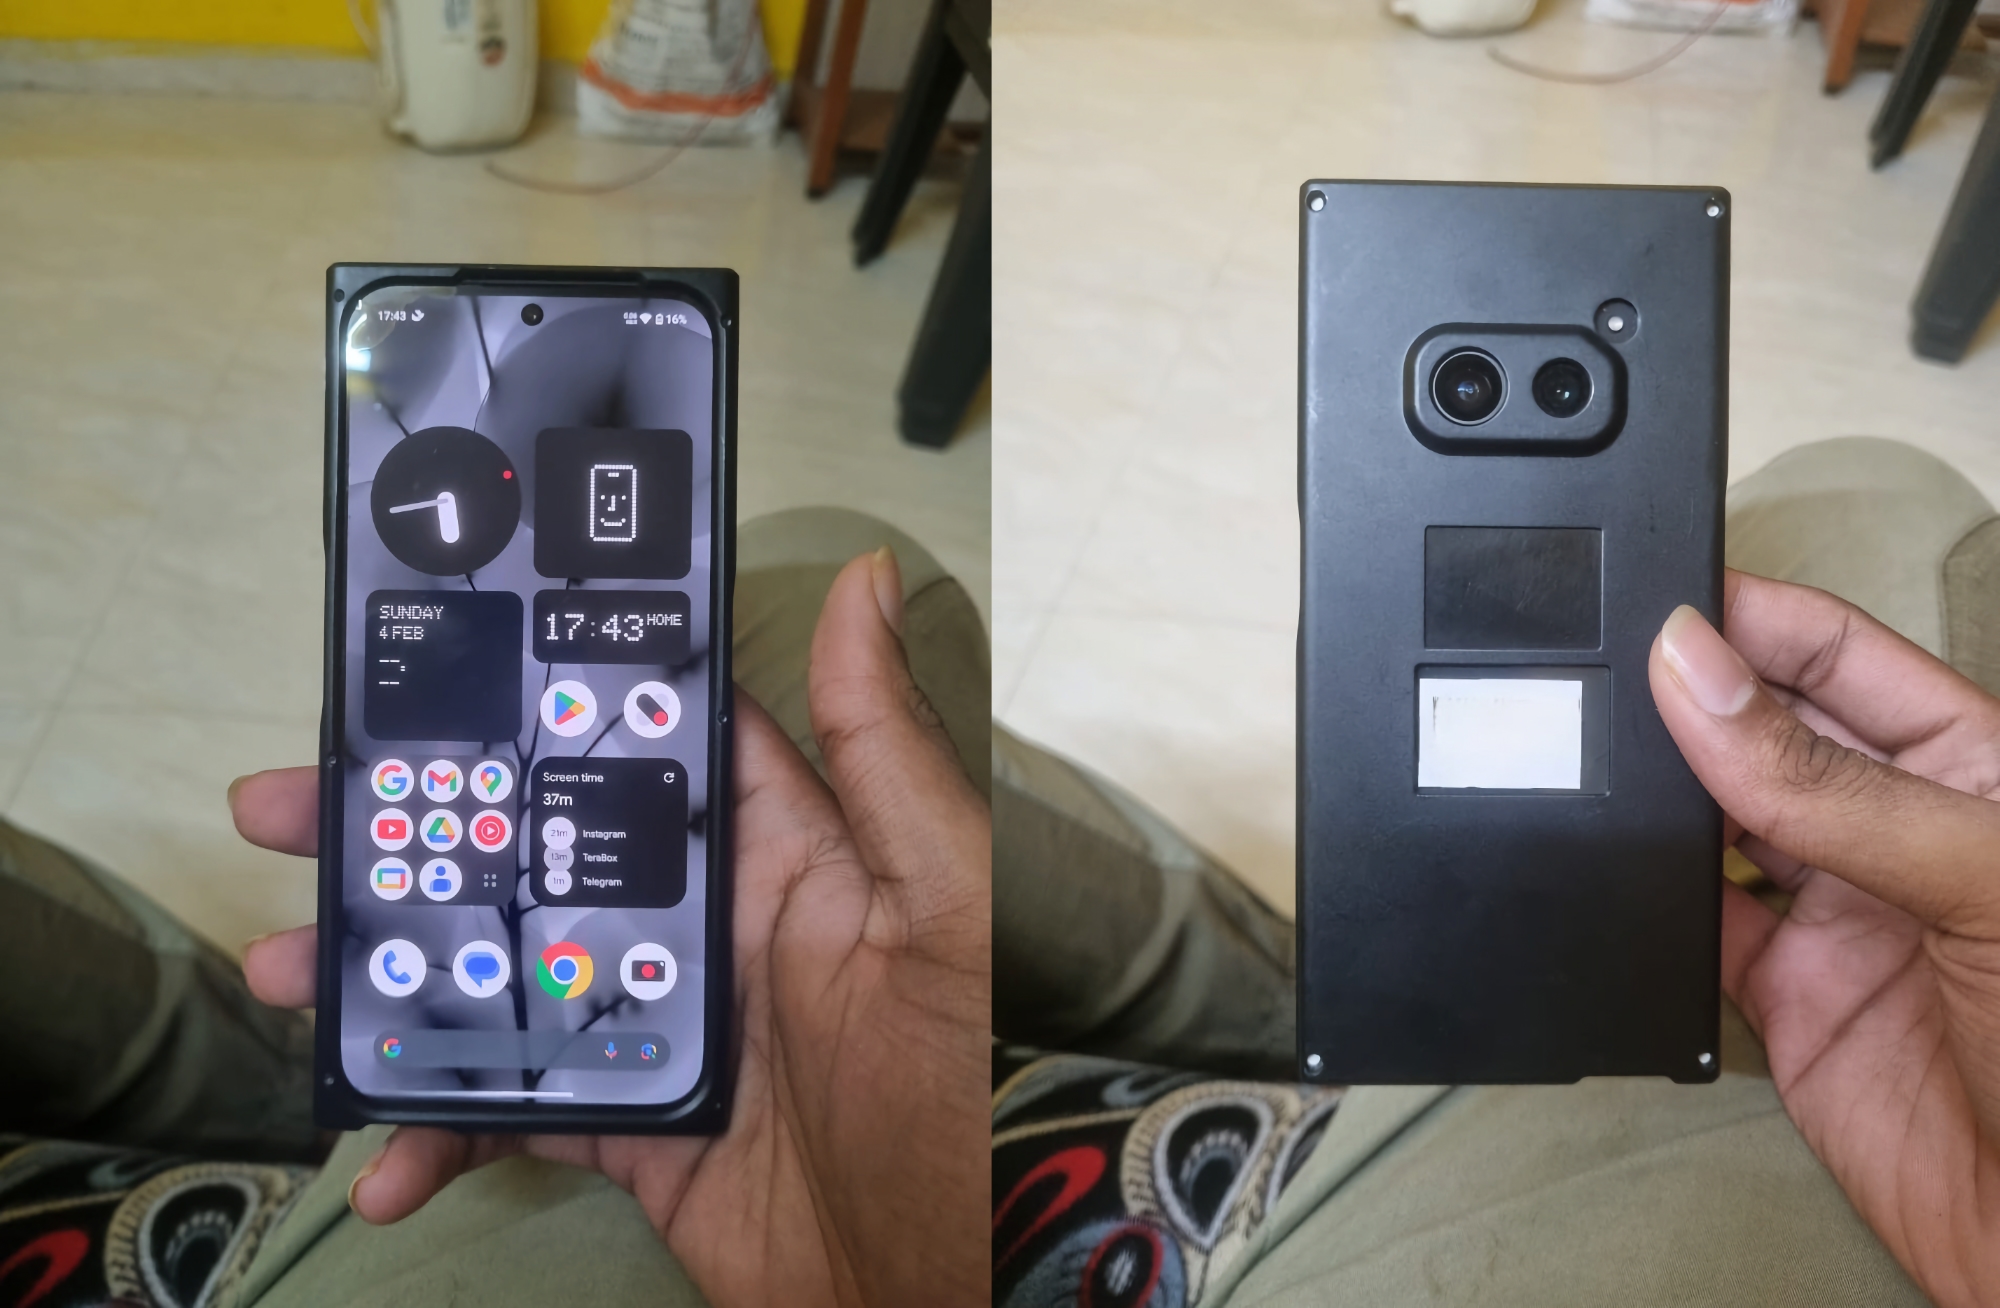 The Nothing Phone (2a) has surfaced in photos with a flat display and dual cameras